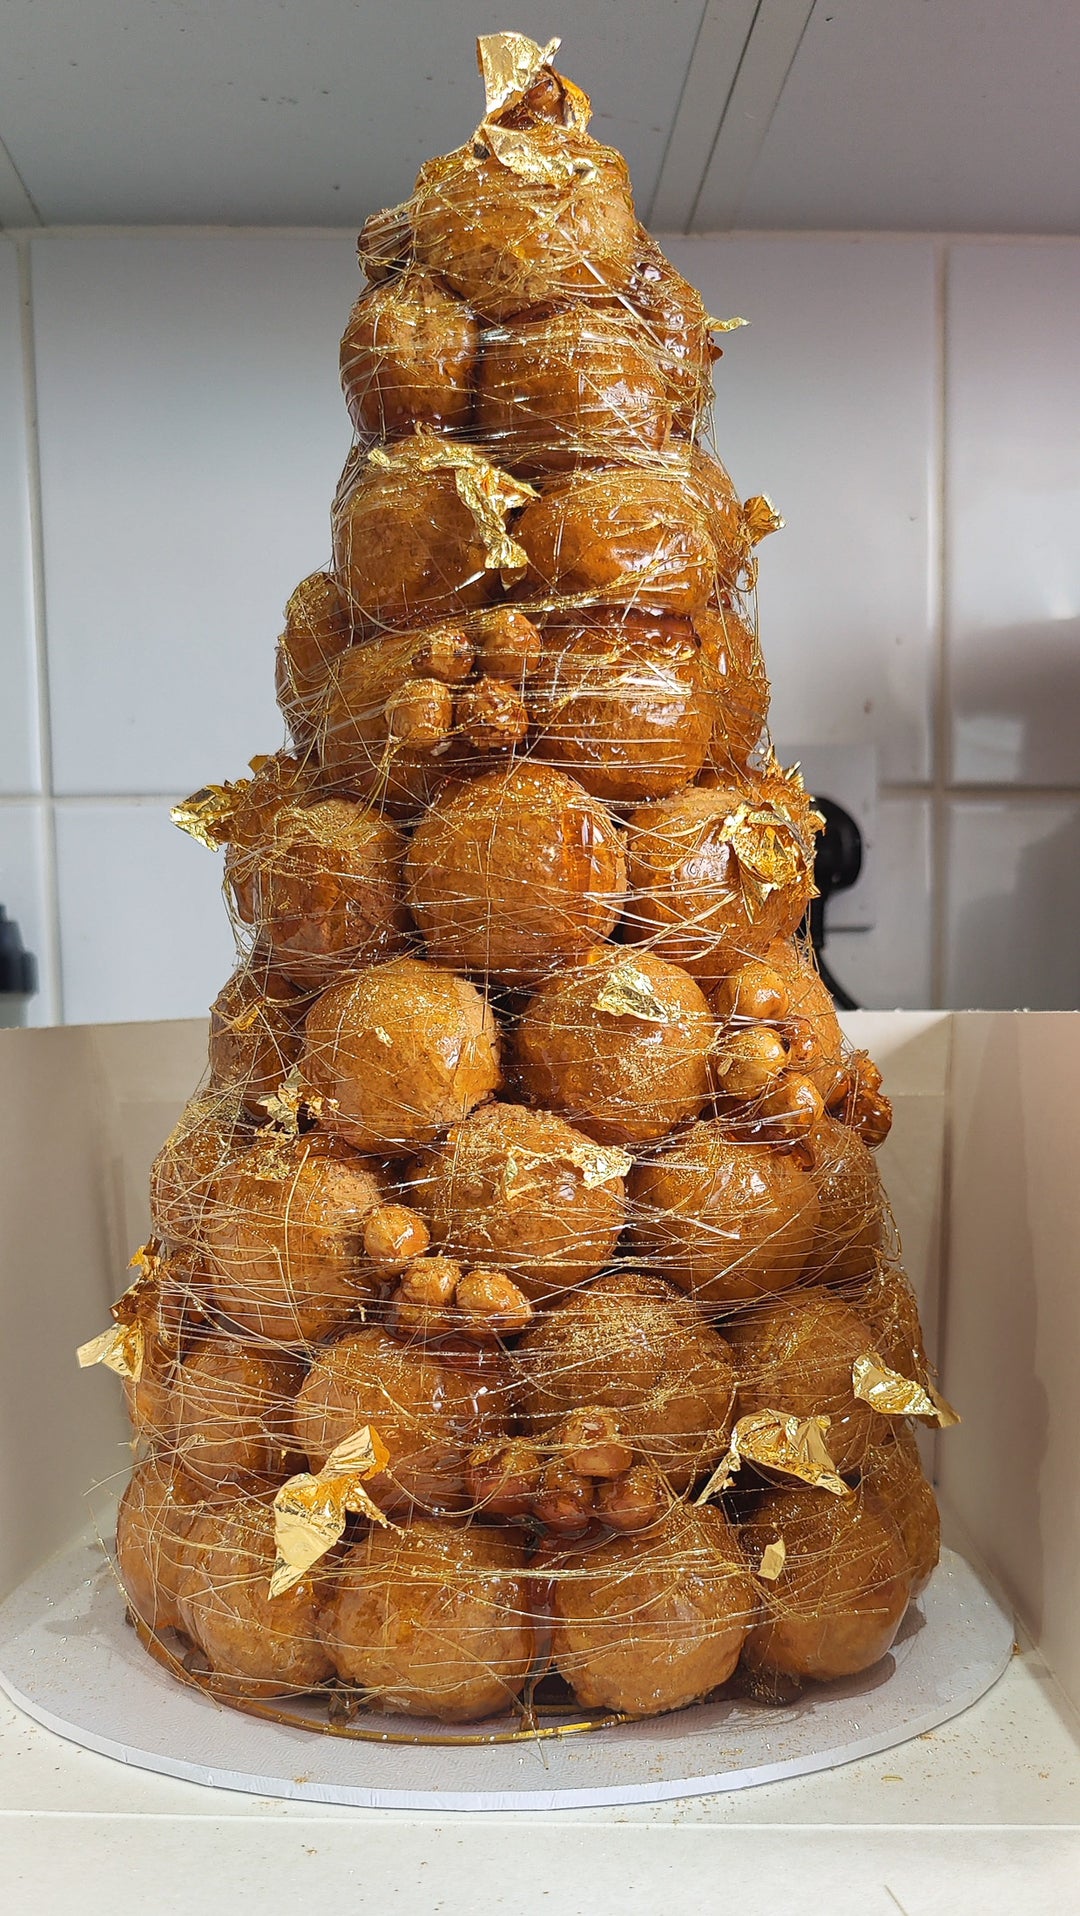 Mini croquembouche with hazelnut and edible 24ct gold leaf